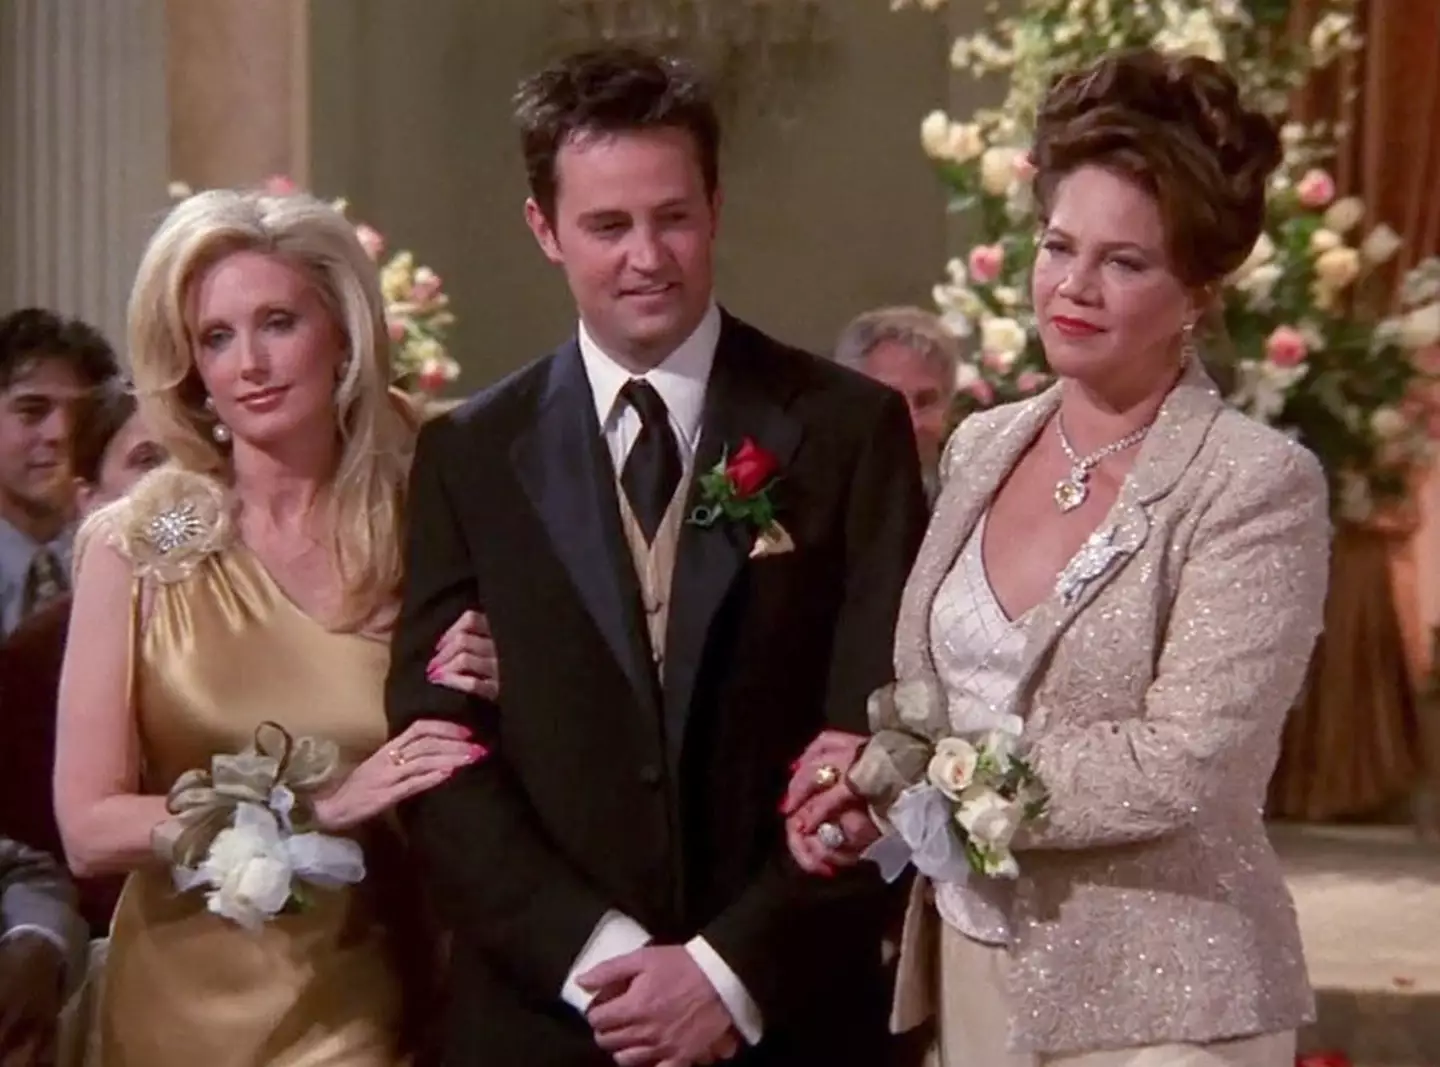 From left to right: Morgan Fairchild, Matthew Perry and Kathleen Turner.